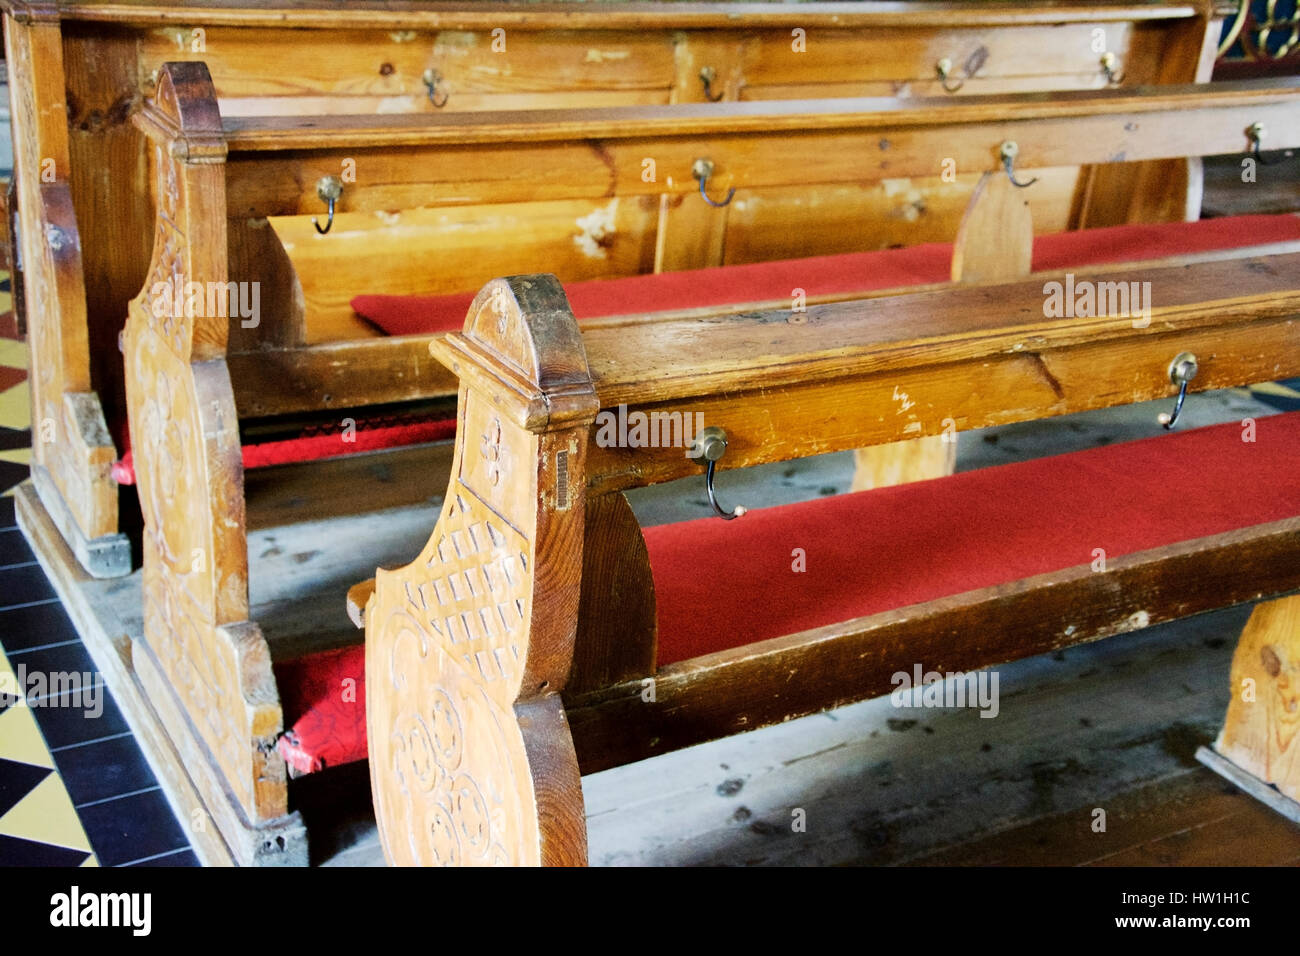 Wooden benches in a centuries-old church in Europe. Stock Photo